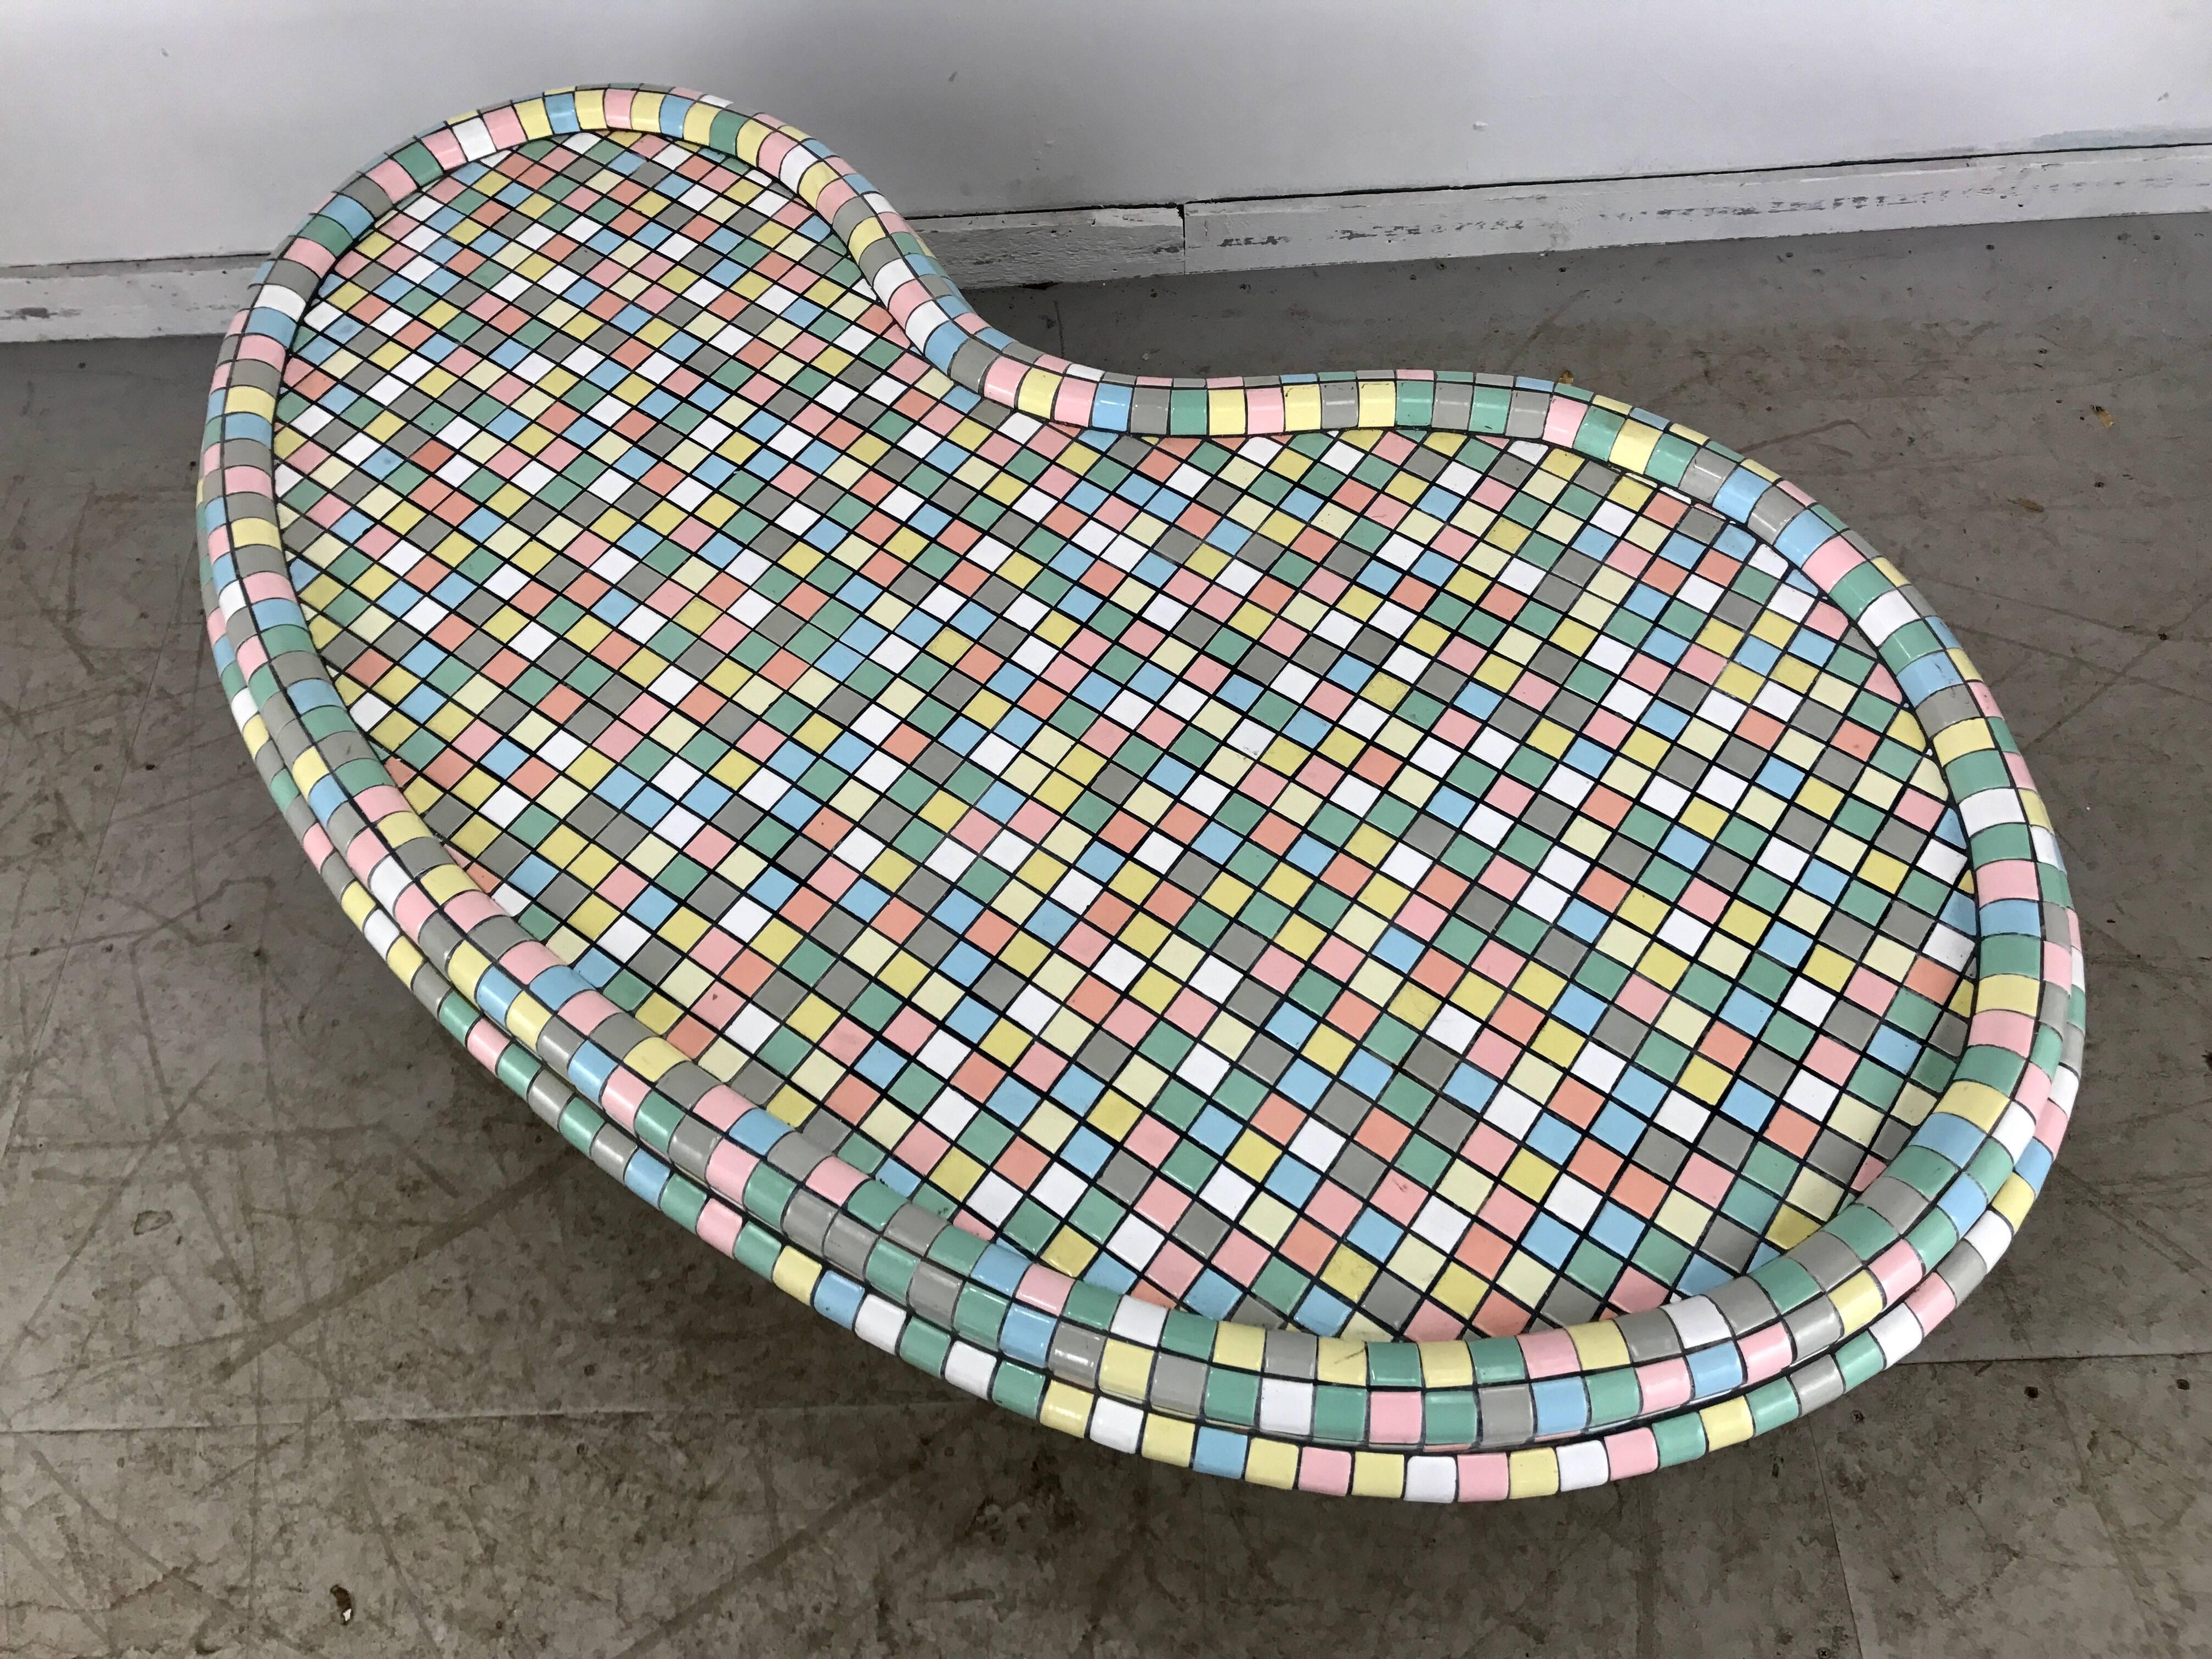 Classic Mid Century Modern Kidney Shape Mosaic Tile Top Coffee/cocktail Table,attributed to Honnenberg. Amazing layered mosaic multi color tile top. Wood wrapped base casters.